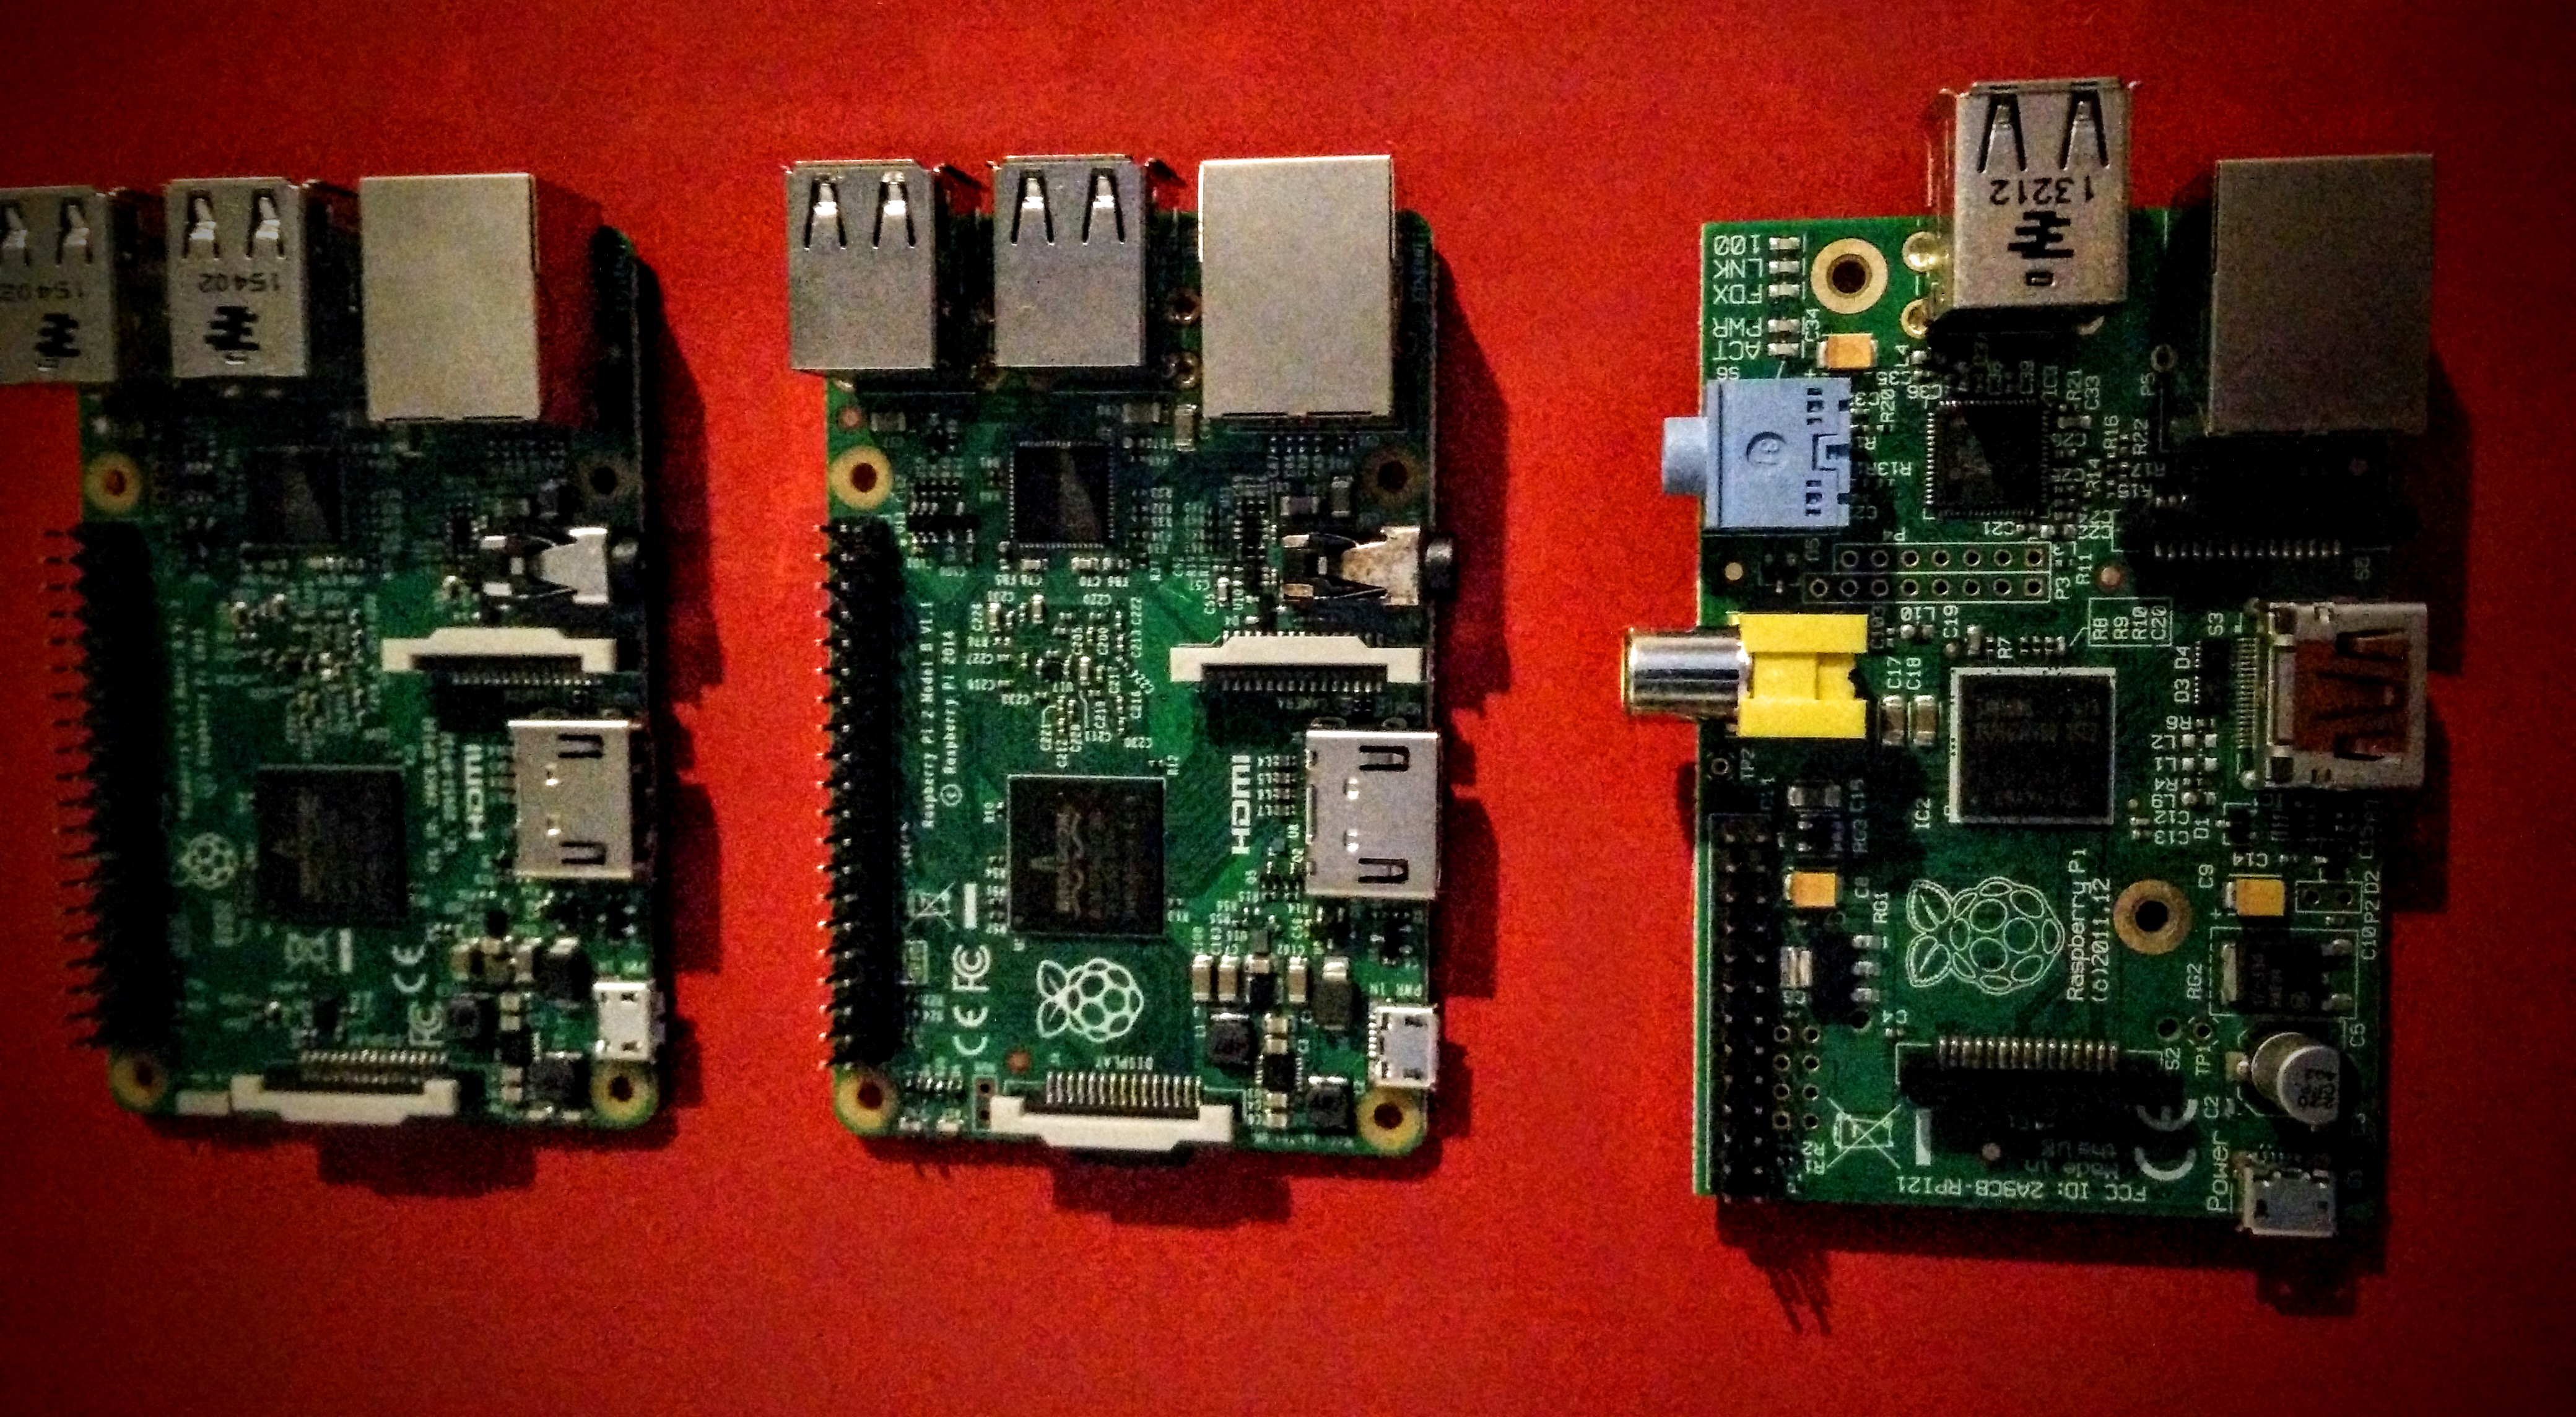 The Raspberry Pi 1, 2 and 3 compared